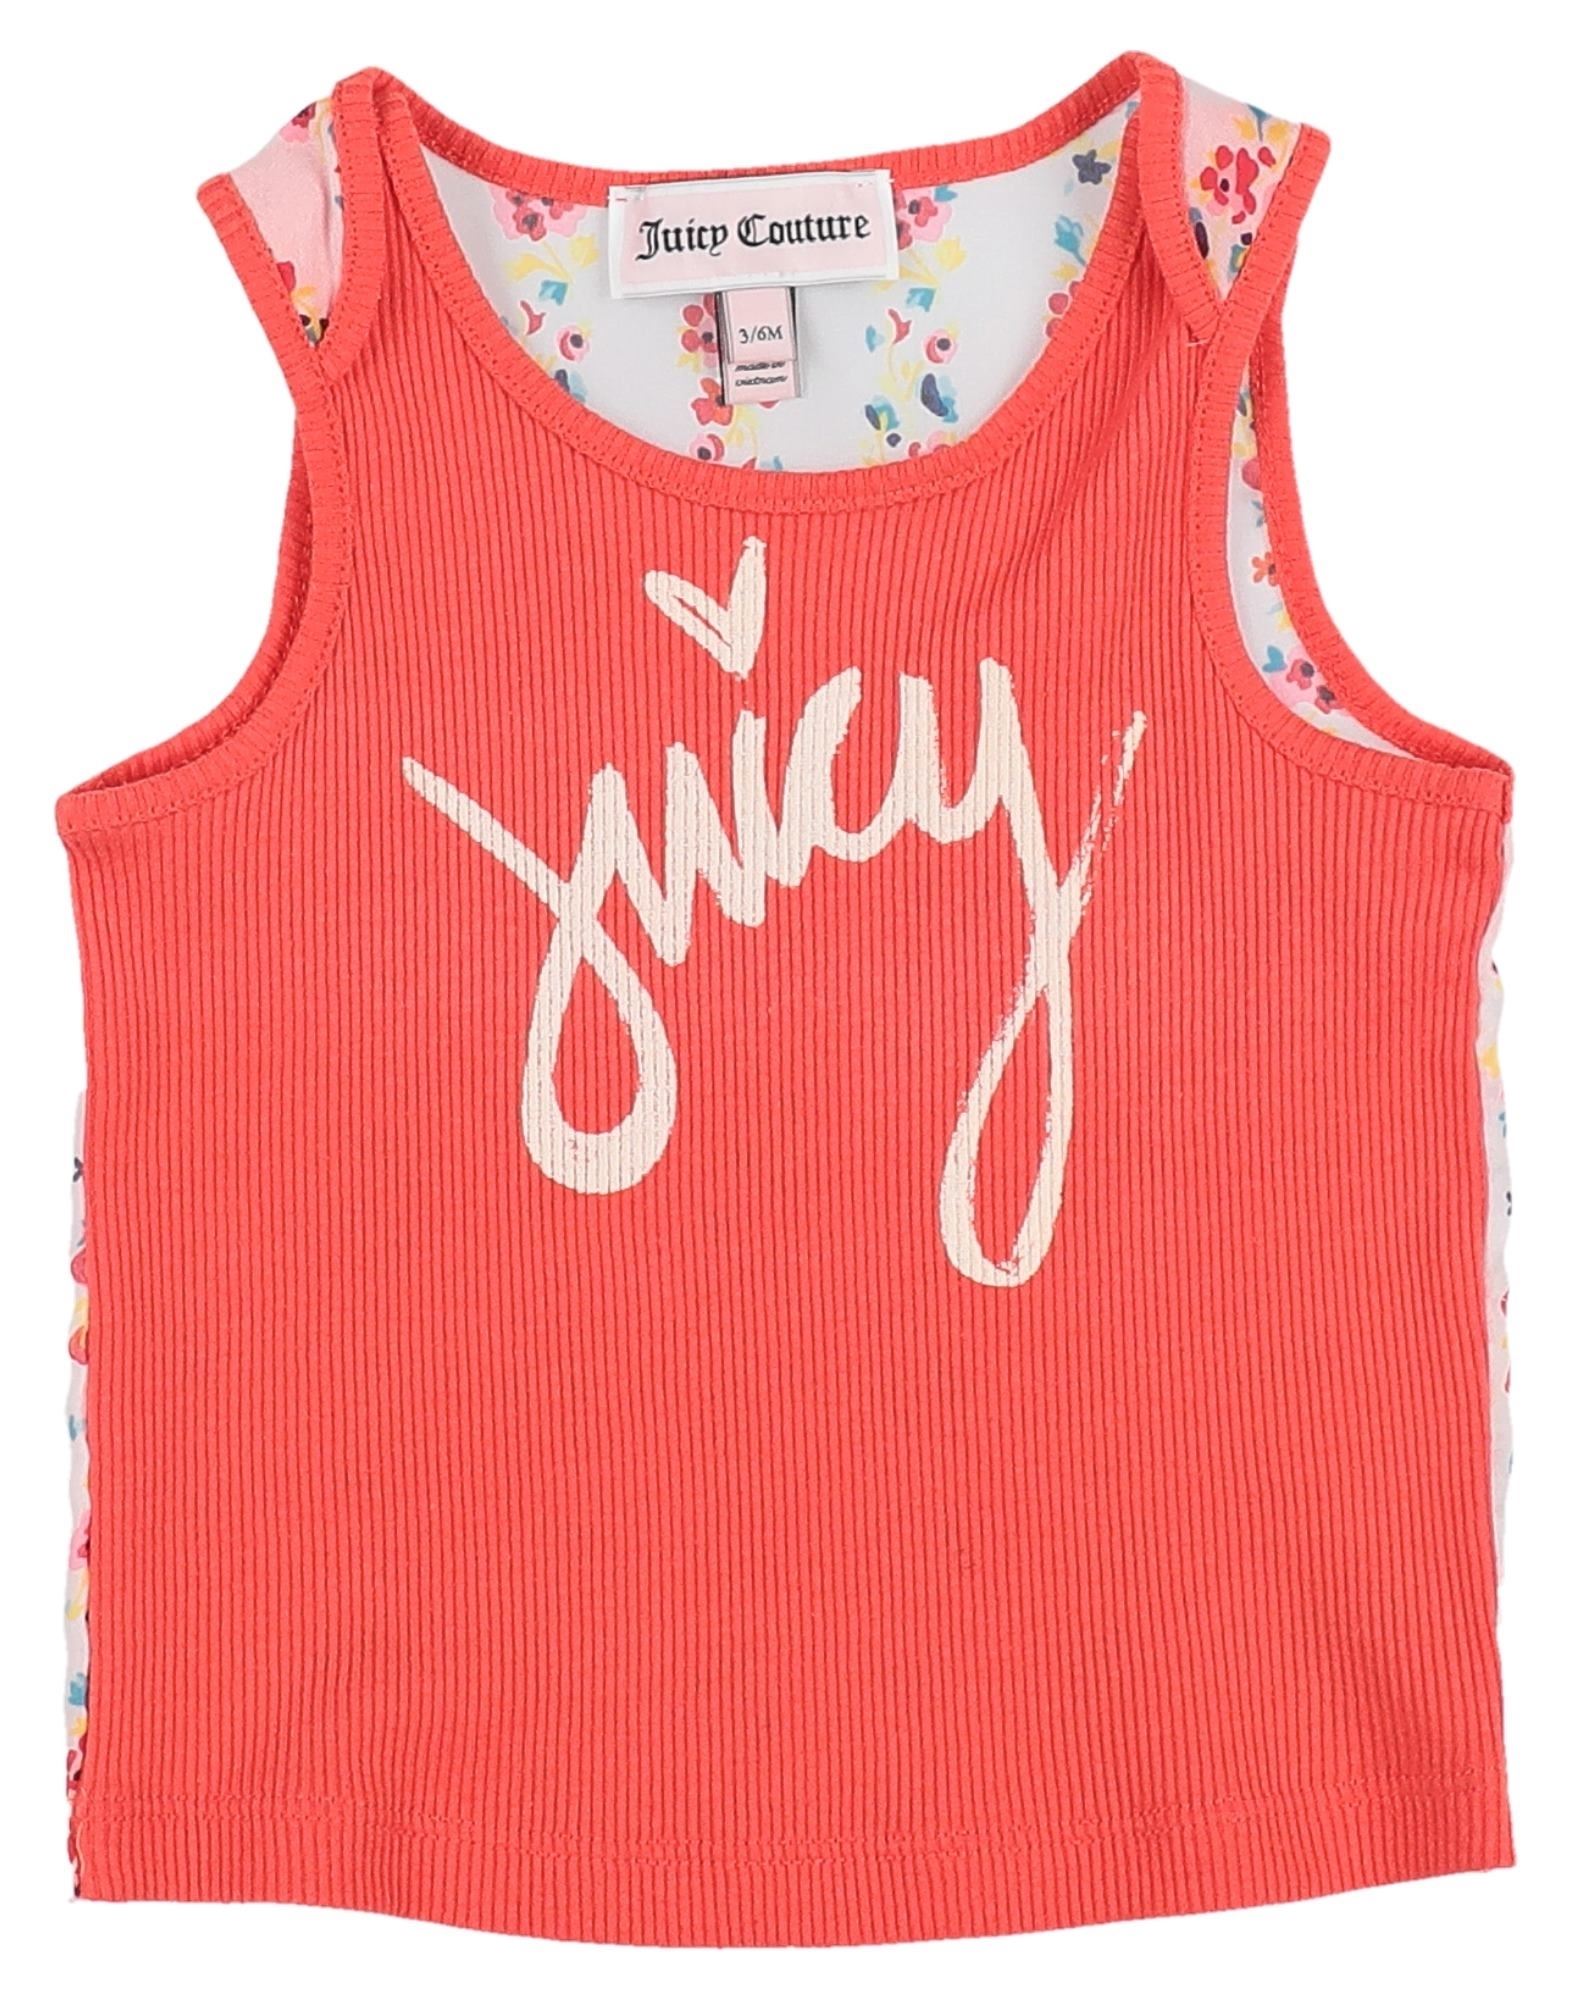 Juicy Couture Kids' T-shirts In Orange